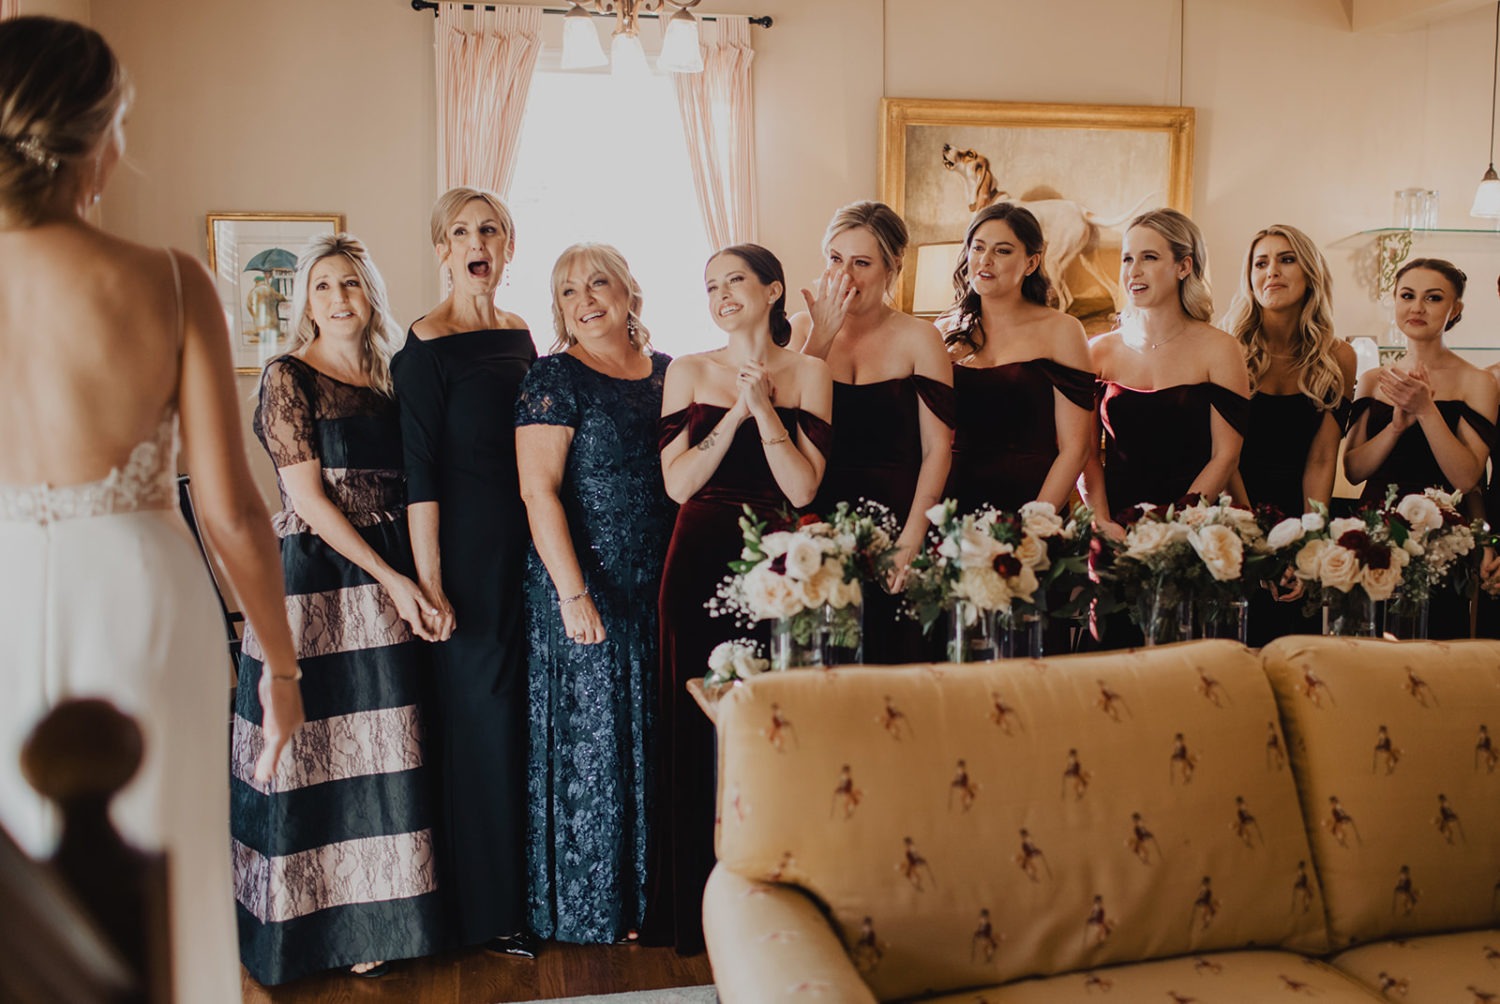 Bride reveals wedding dress to bridesmaids and moms while getting ready on the wedding morning